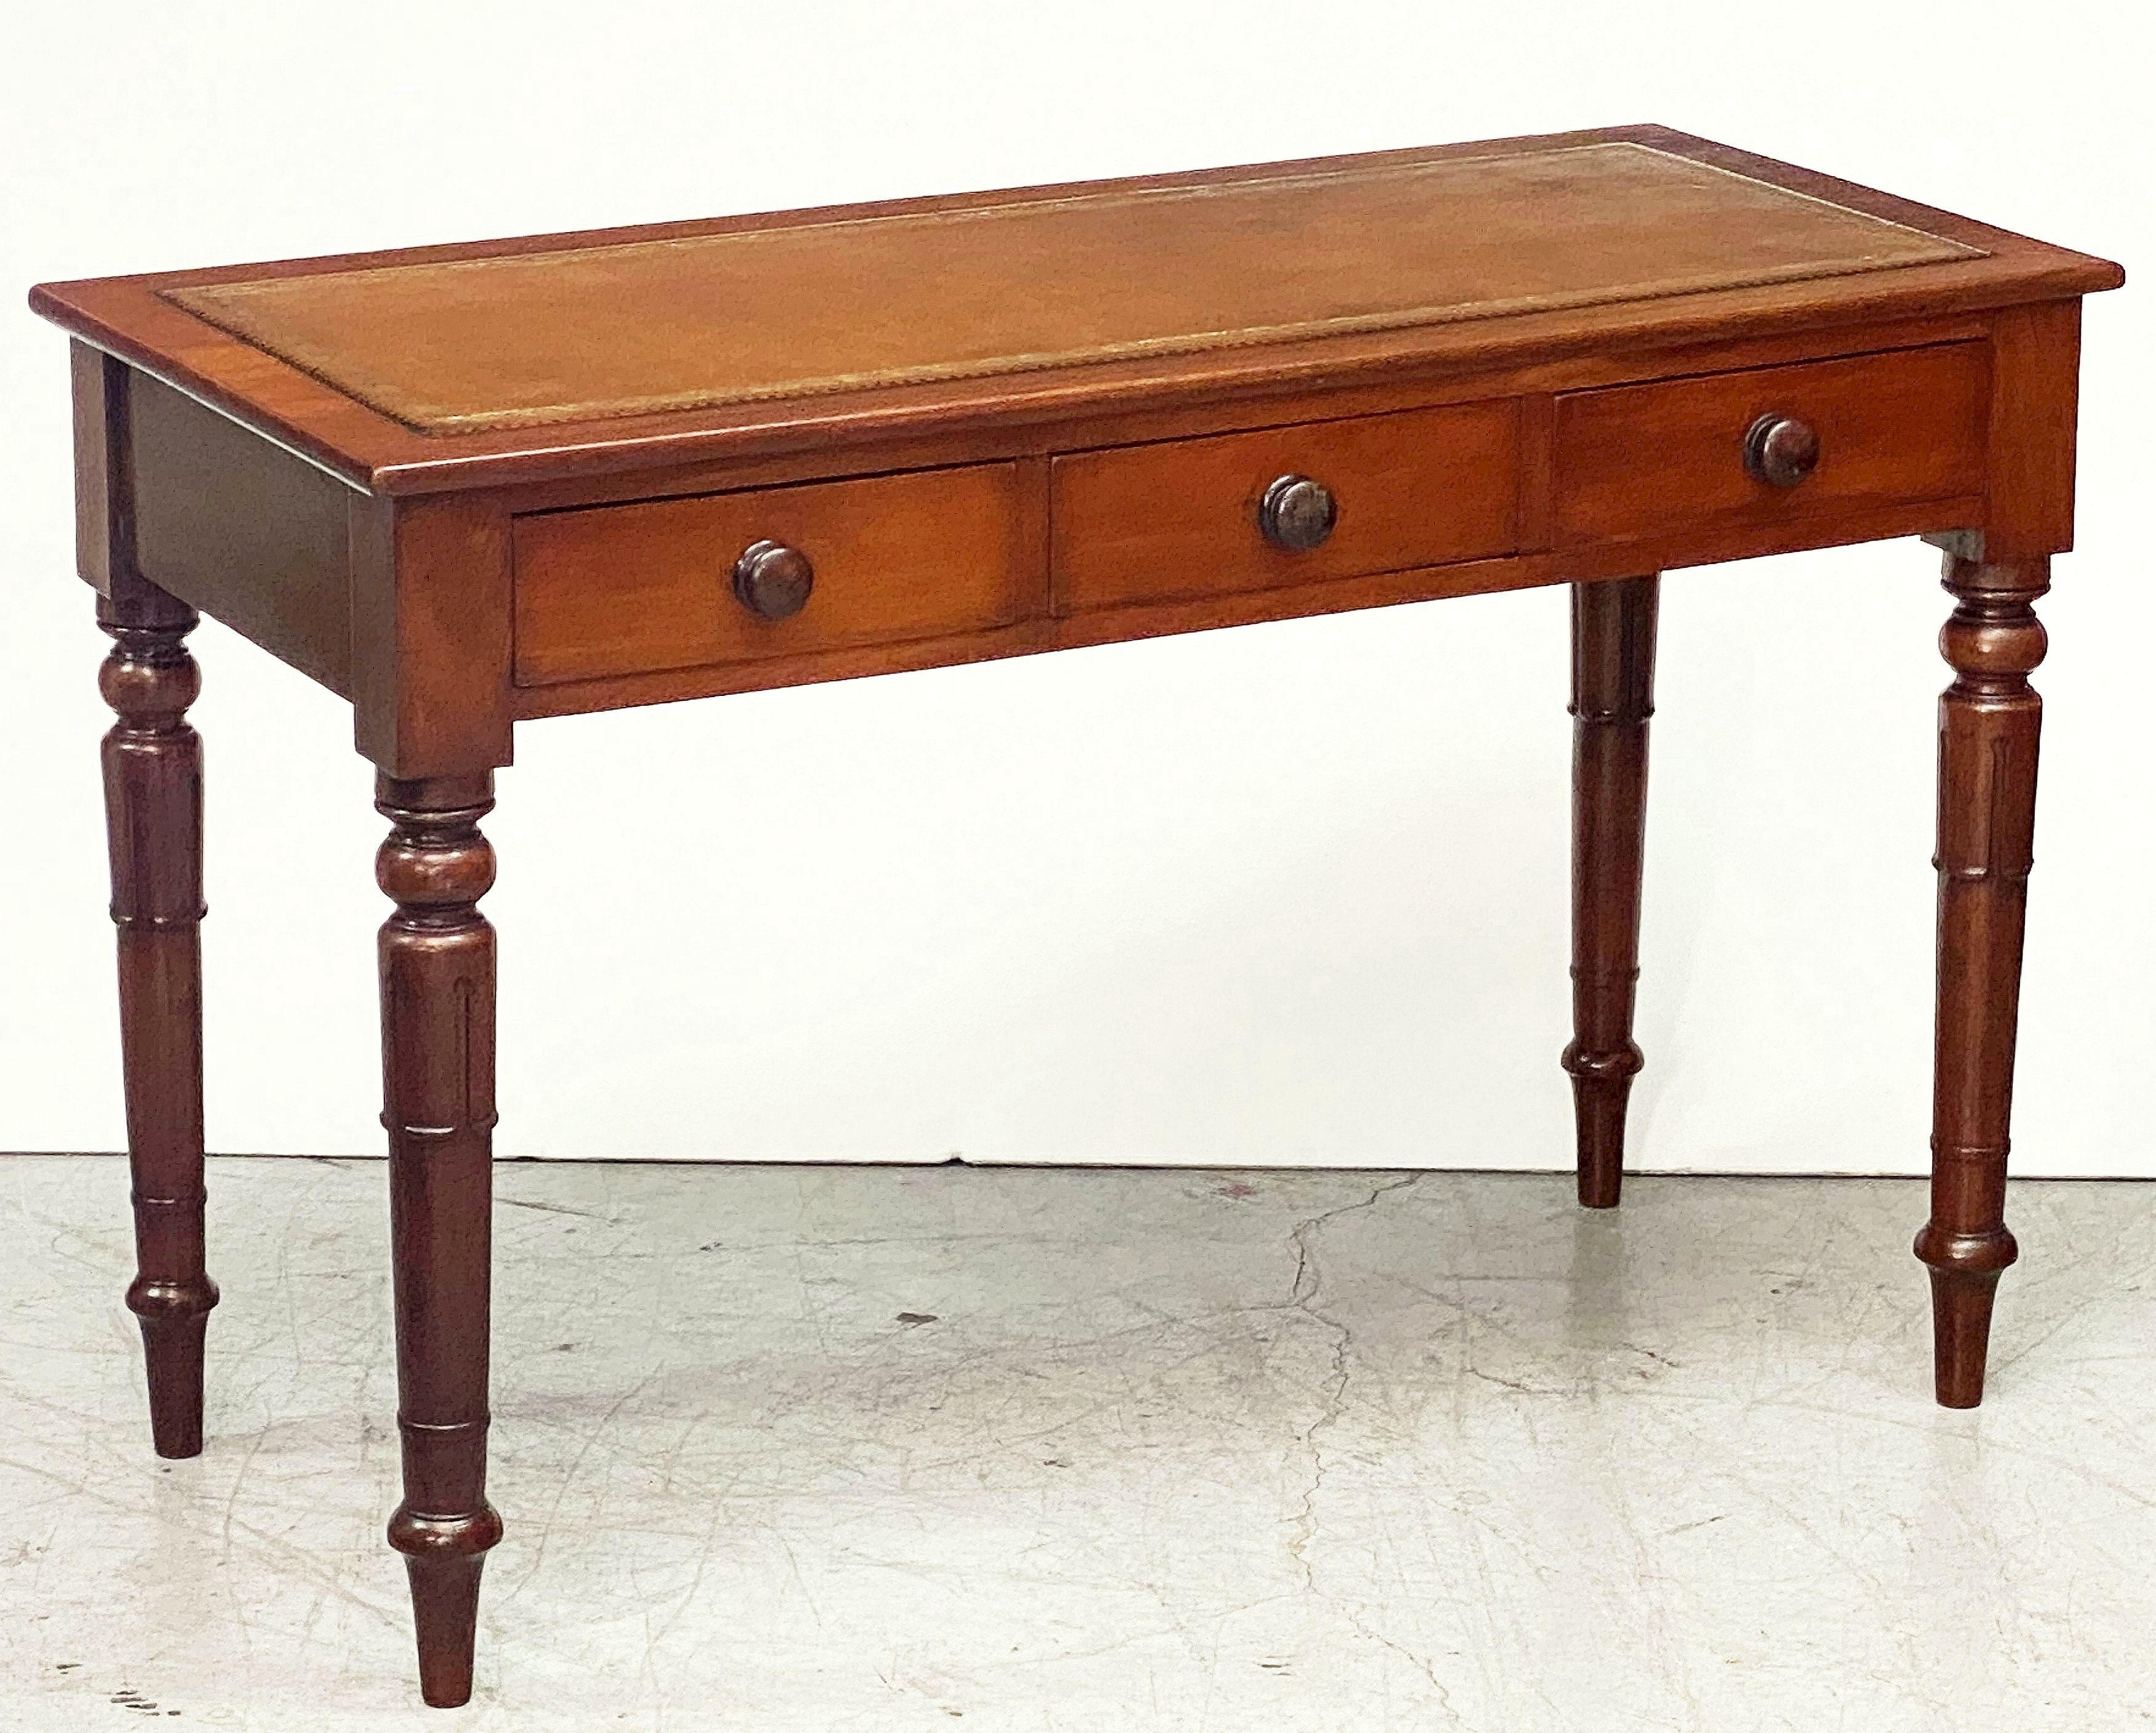 19th Century William IV Writing Desk or Table of Mahogany with Leather Top from England